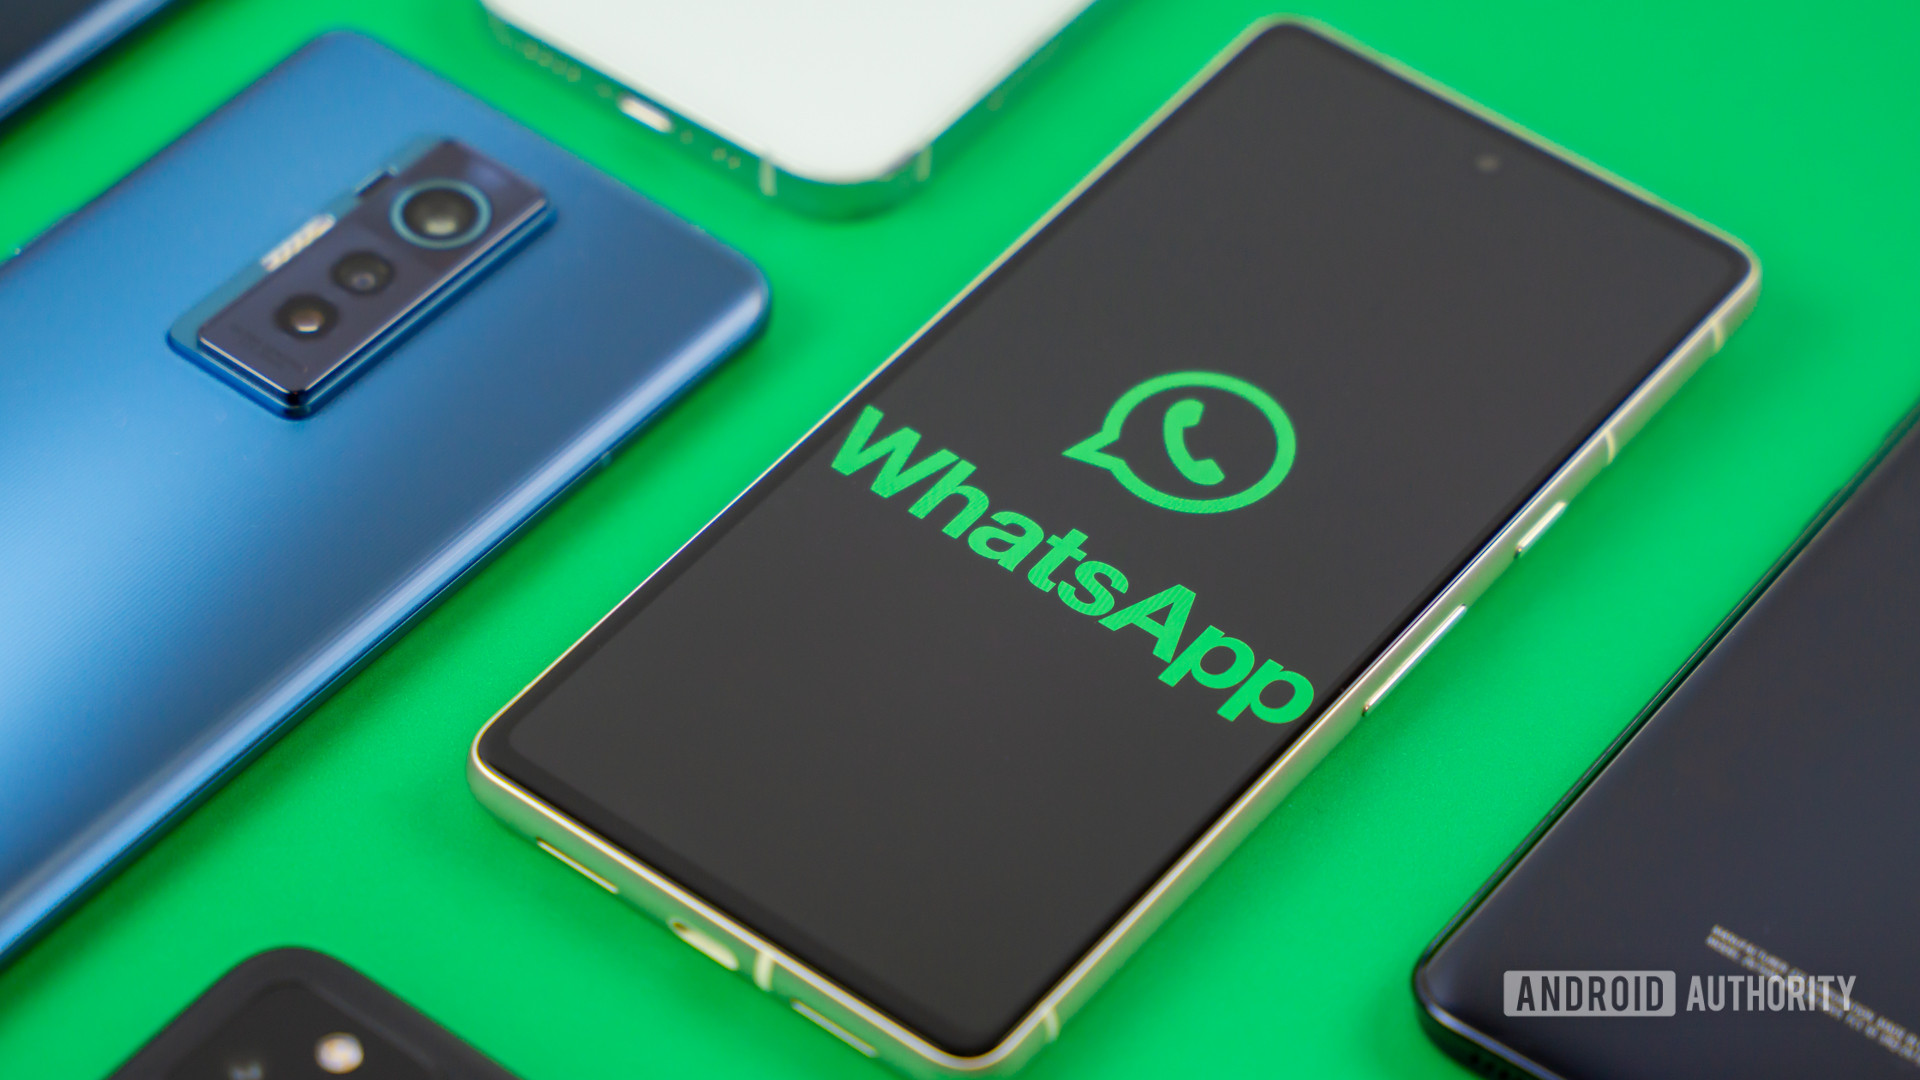 WhatsApp logo on smartphone next to other devices Stock photo 1